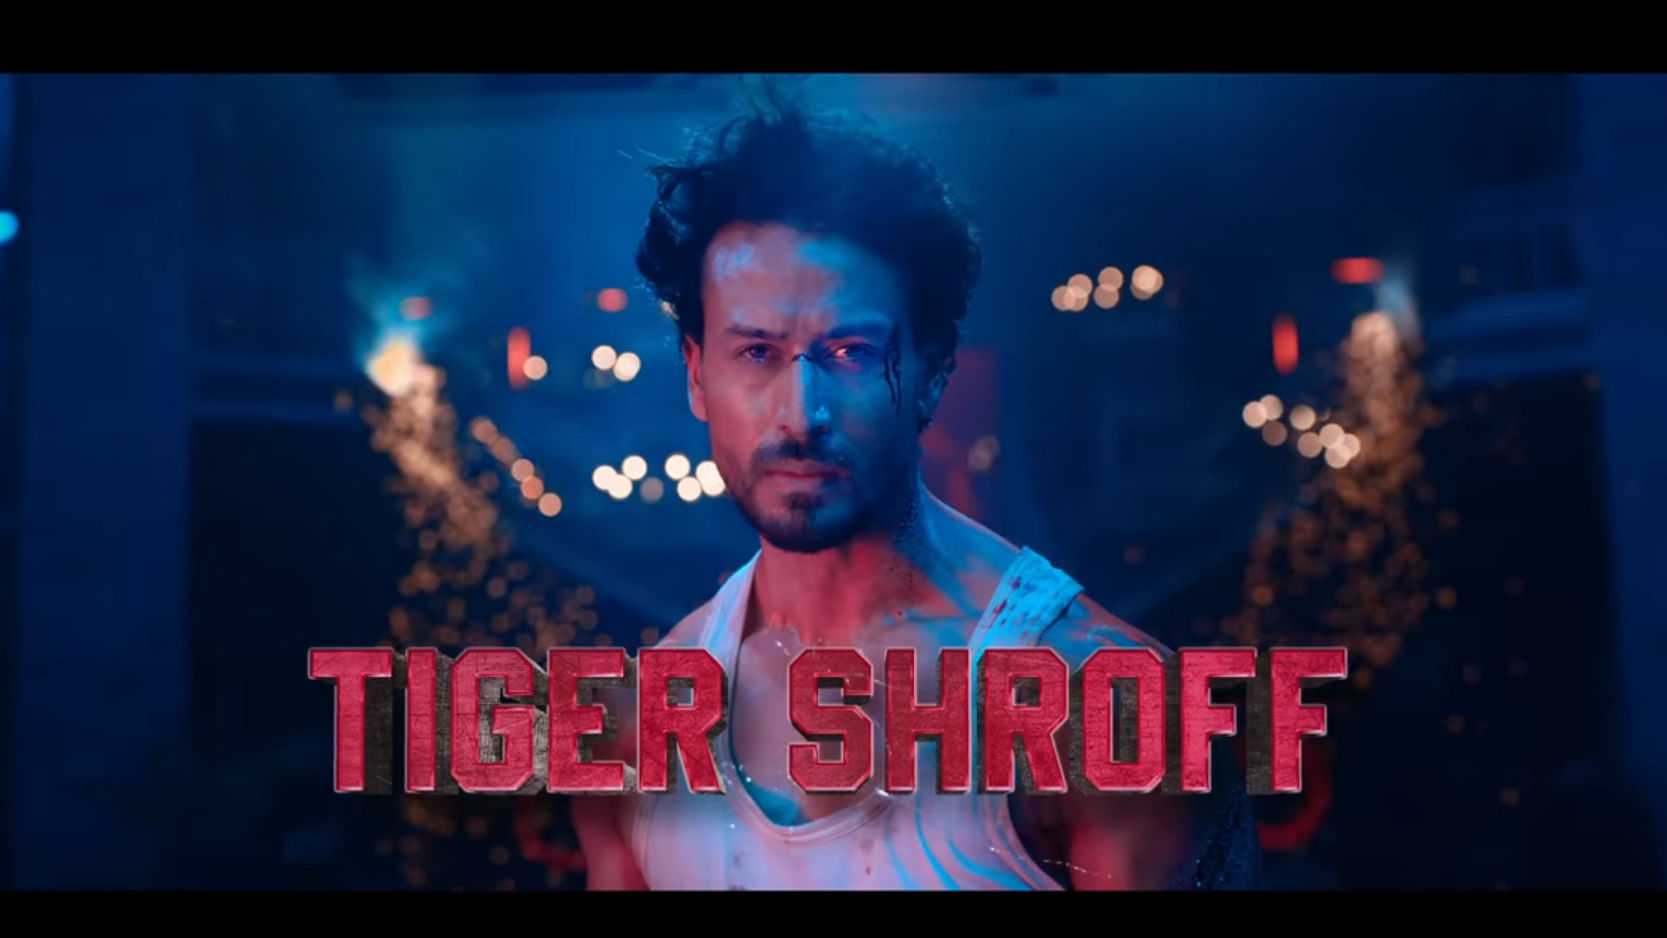 This will be Shroff's first project with Khaitan, known for films such as "Humpty Sharma Ki Dulhania", "Badrinath Ki Dulhania" and "Dhadak". Credit: YouTube/ @DharmaMovies